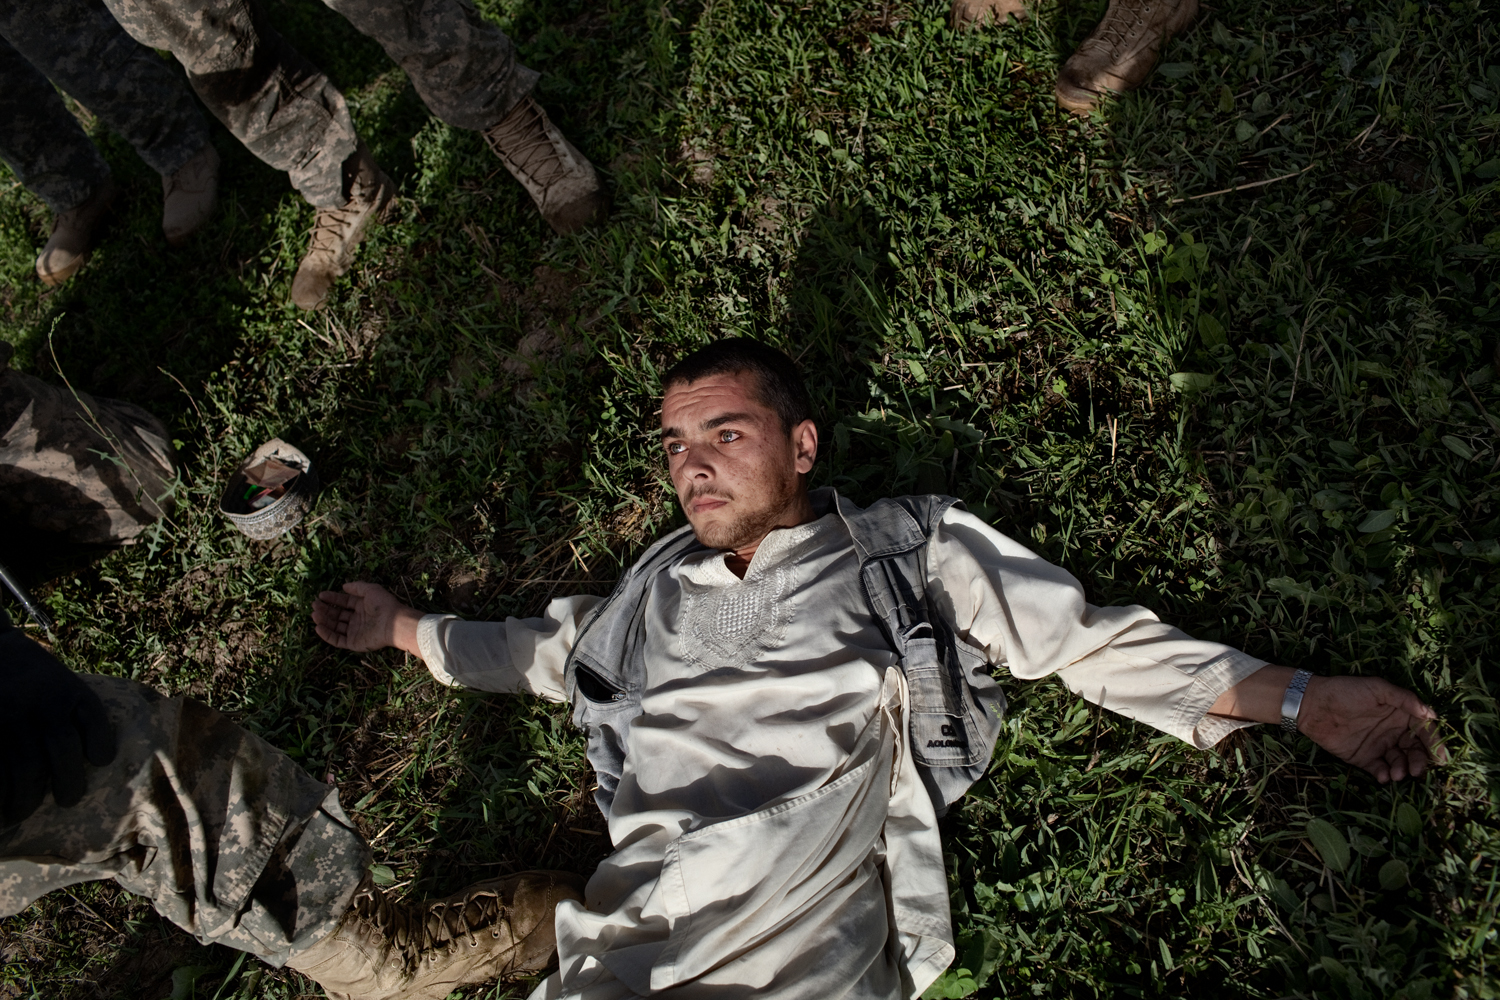  An Afghan man is searched by U.S. Army in the Tangi Valley, Wardak Province, Afghanistan.    